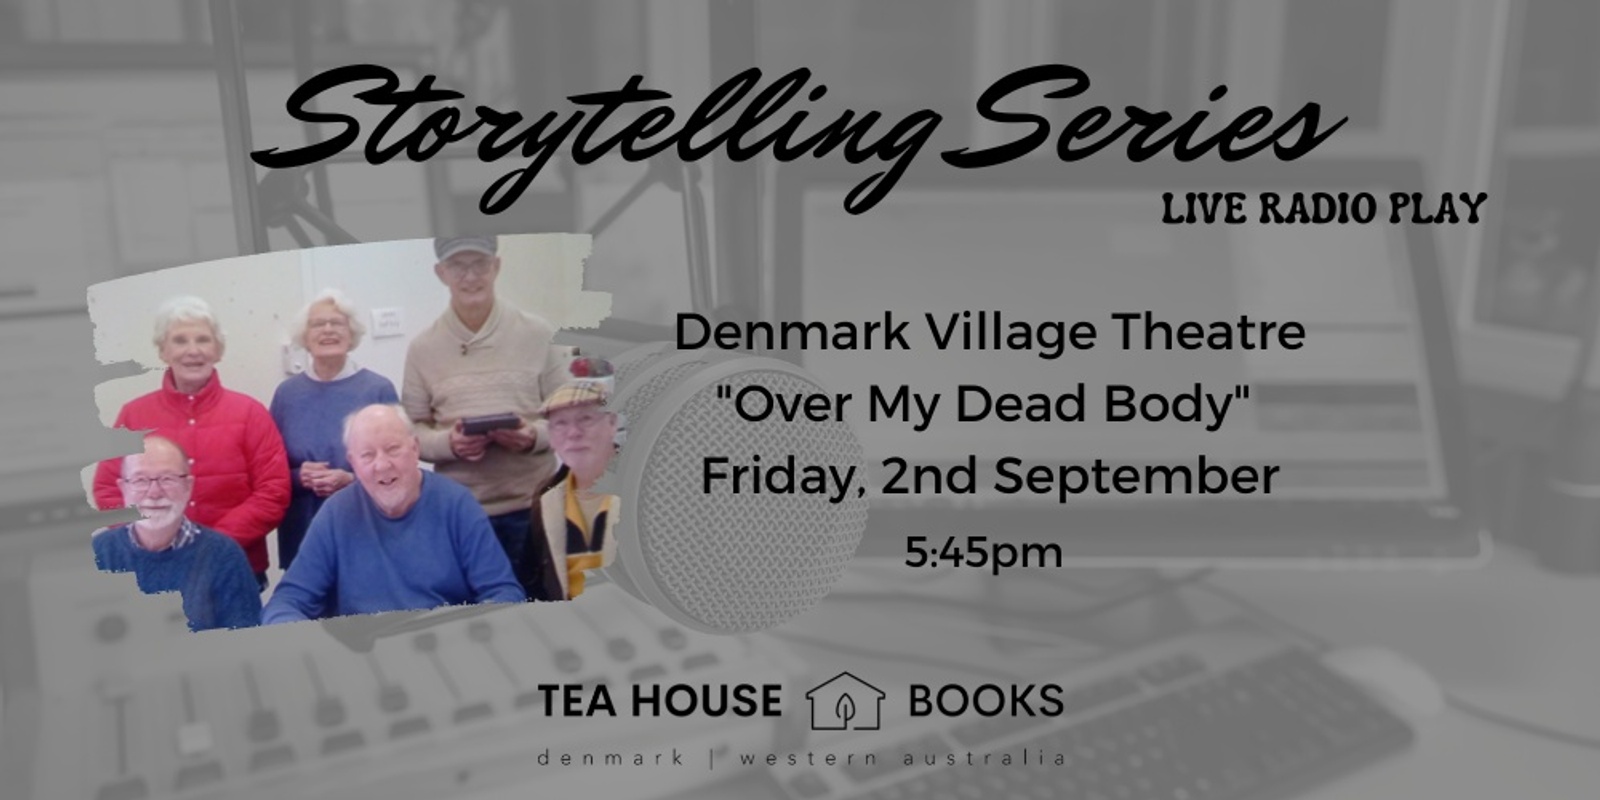 Banner image for Storytelling Session "Over My Dead Body"